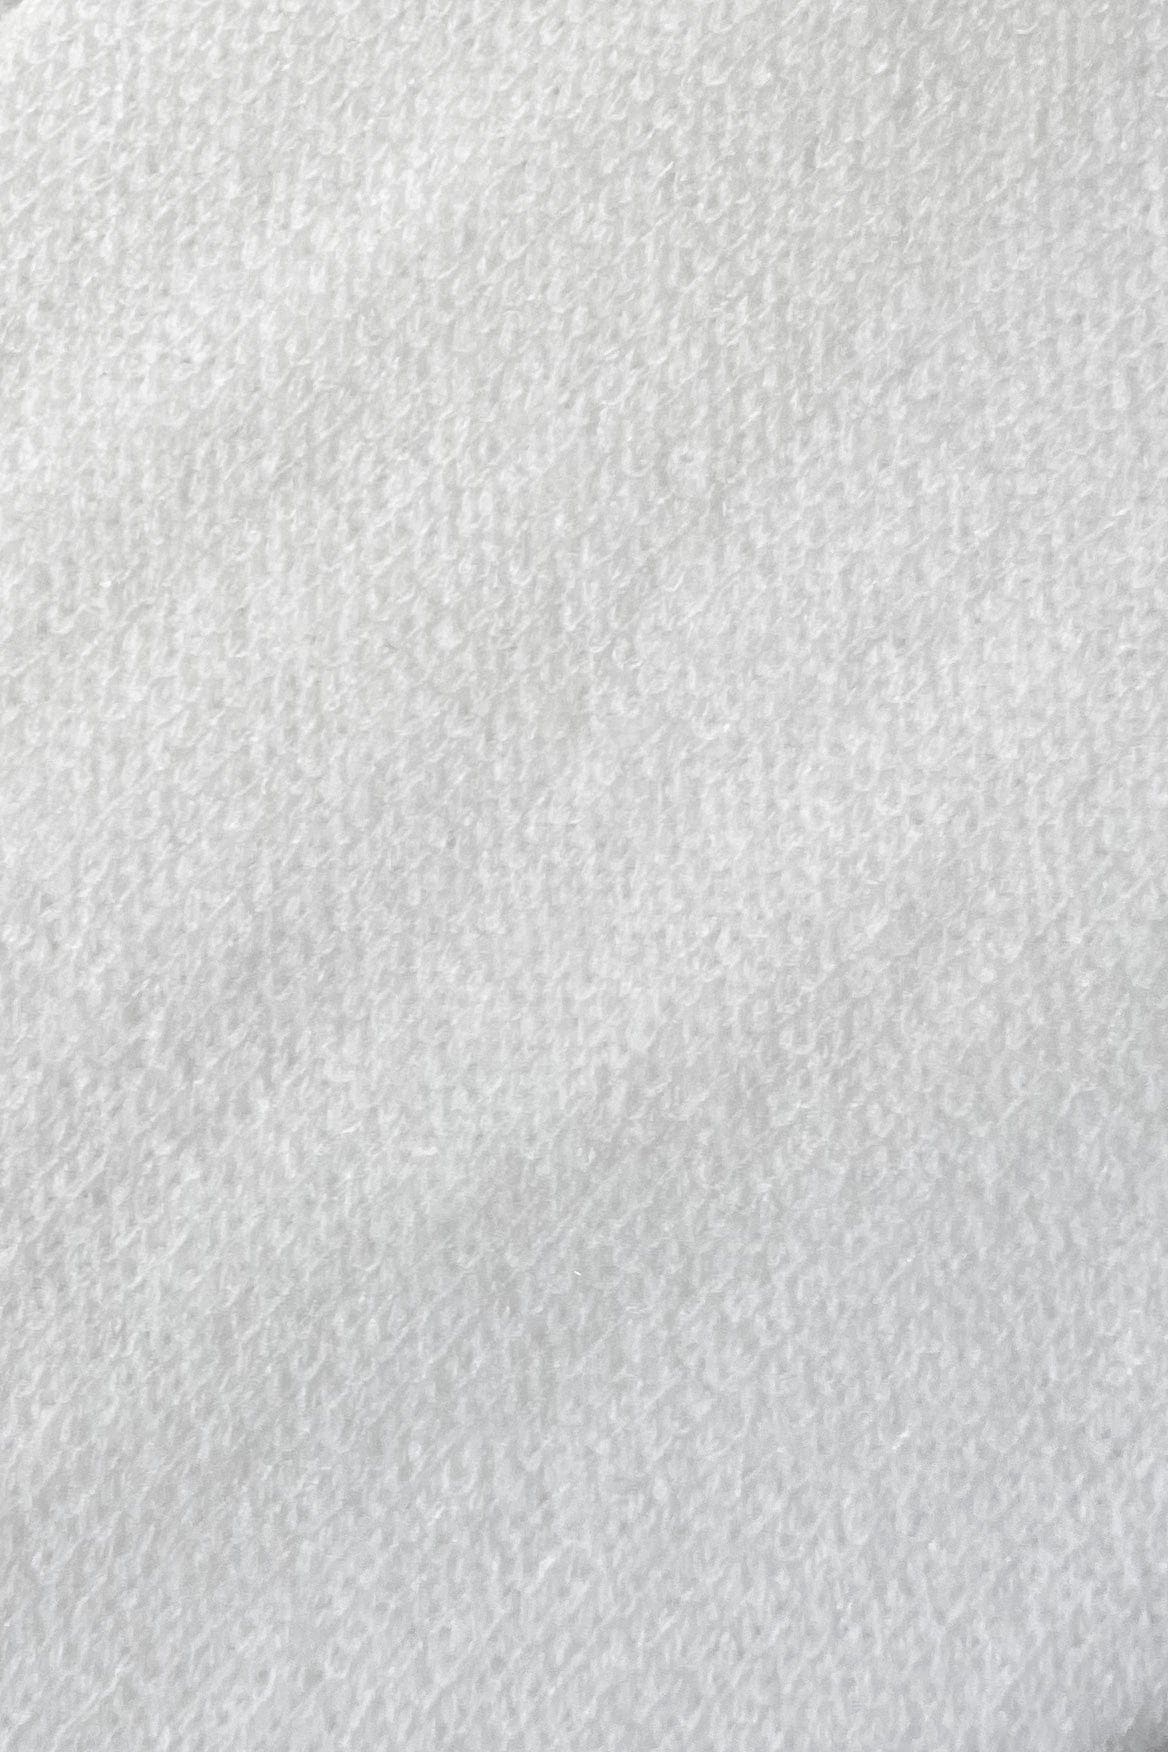 Marthey Top, ACRYLIC &amp; NYLON &amp; POLYESTER, ACRYLIC AND NYLON AND POLYESTER, KNIT, KNITS, KNITTED, KNITWEAR, new arrivals, TOP, TOPS, WHITE, , -MISHKAH